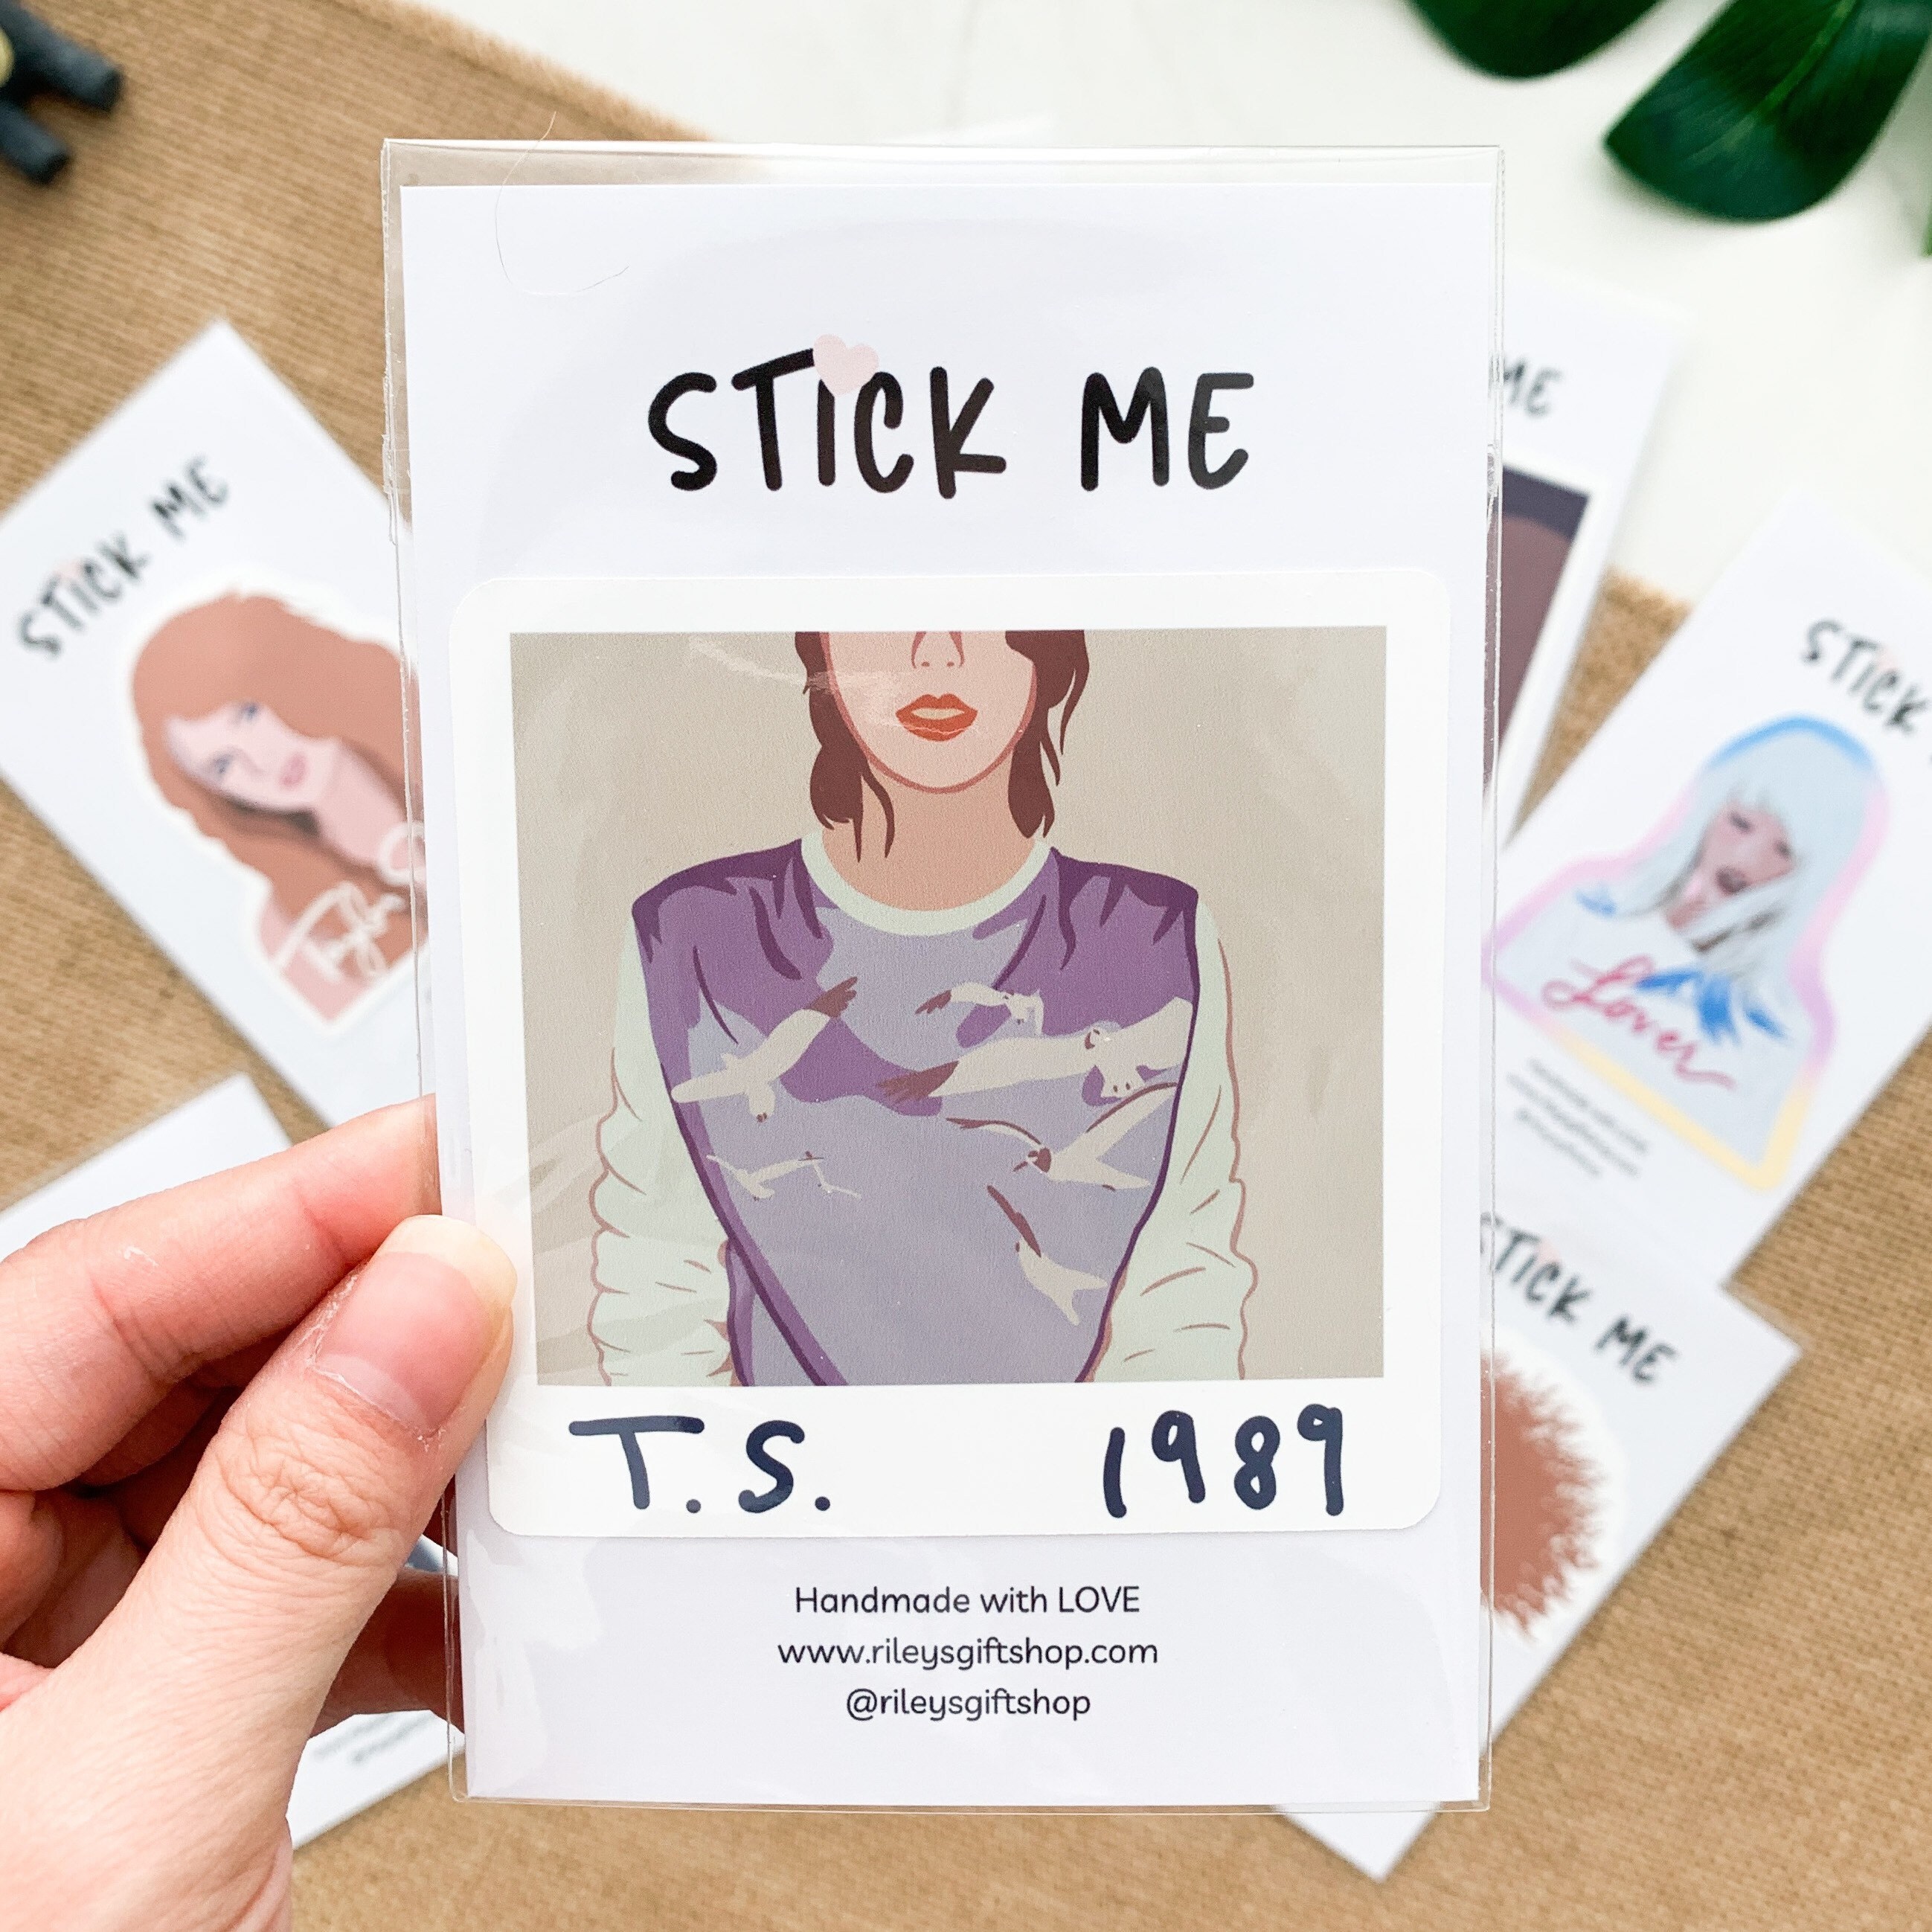 where are you putting your stickers?💖 #swiftiesmerch #stickers #small, Sticker Ideas